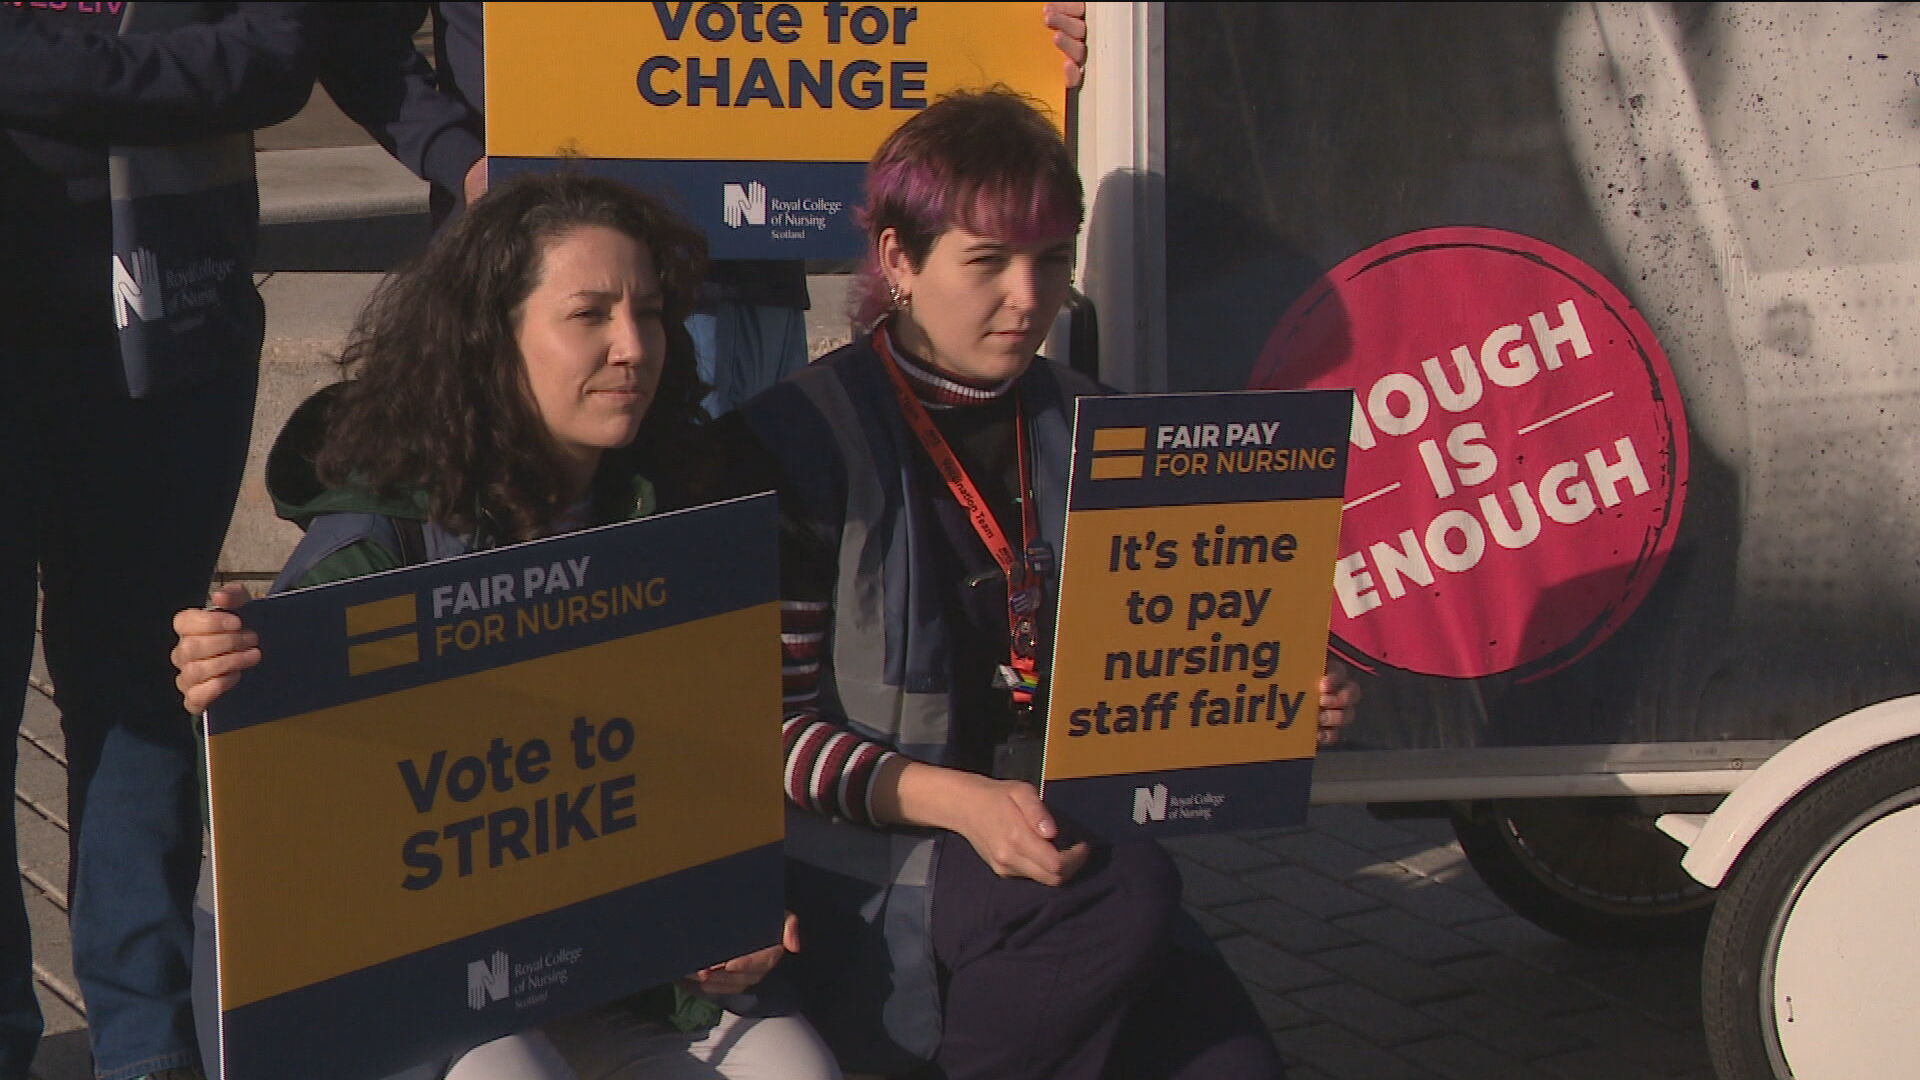 Royal College of Nursing (RCN) began balloting its members for strike action for the first time in its 106-year history.